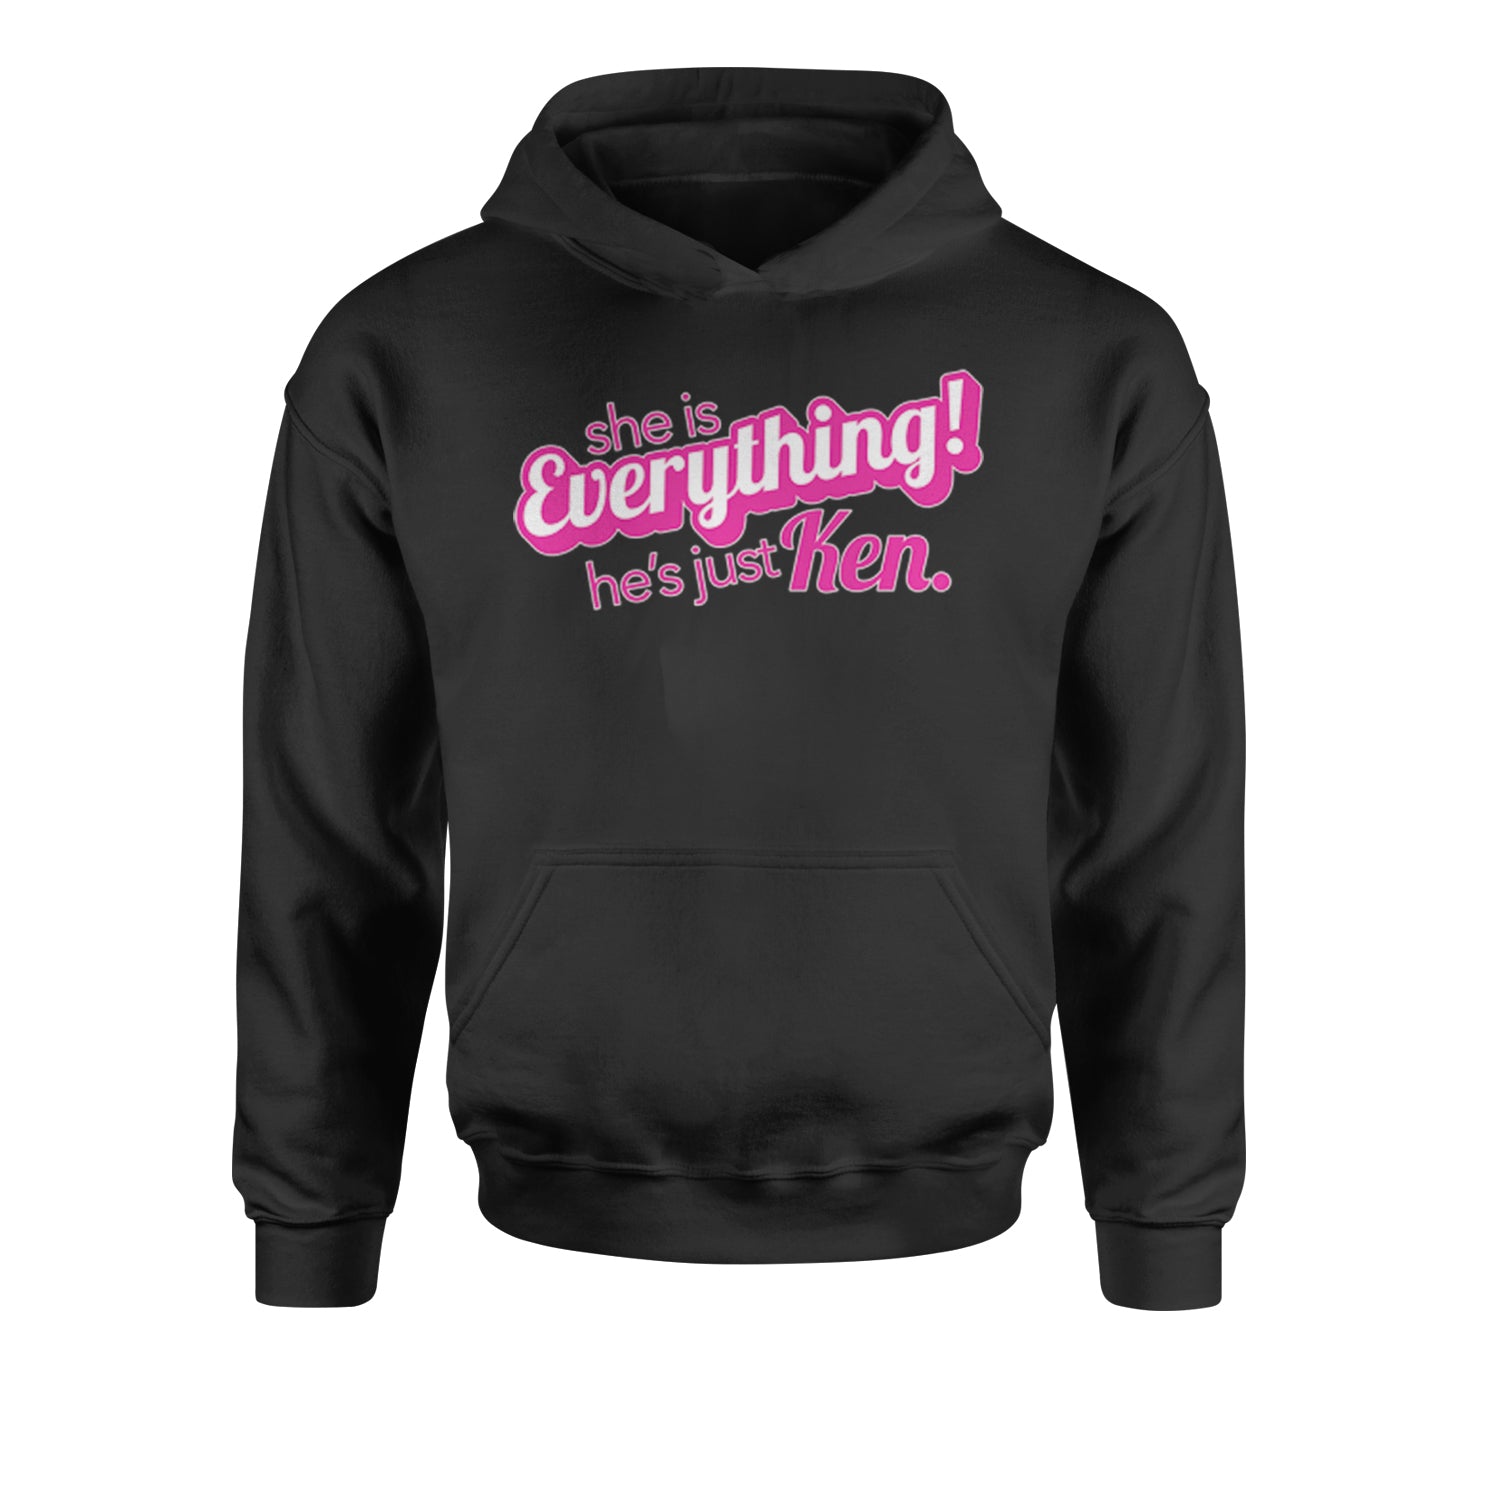 She's Everything, He's Just Ken Youth-Sized Hoodie